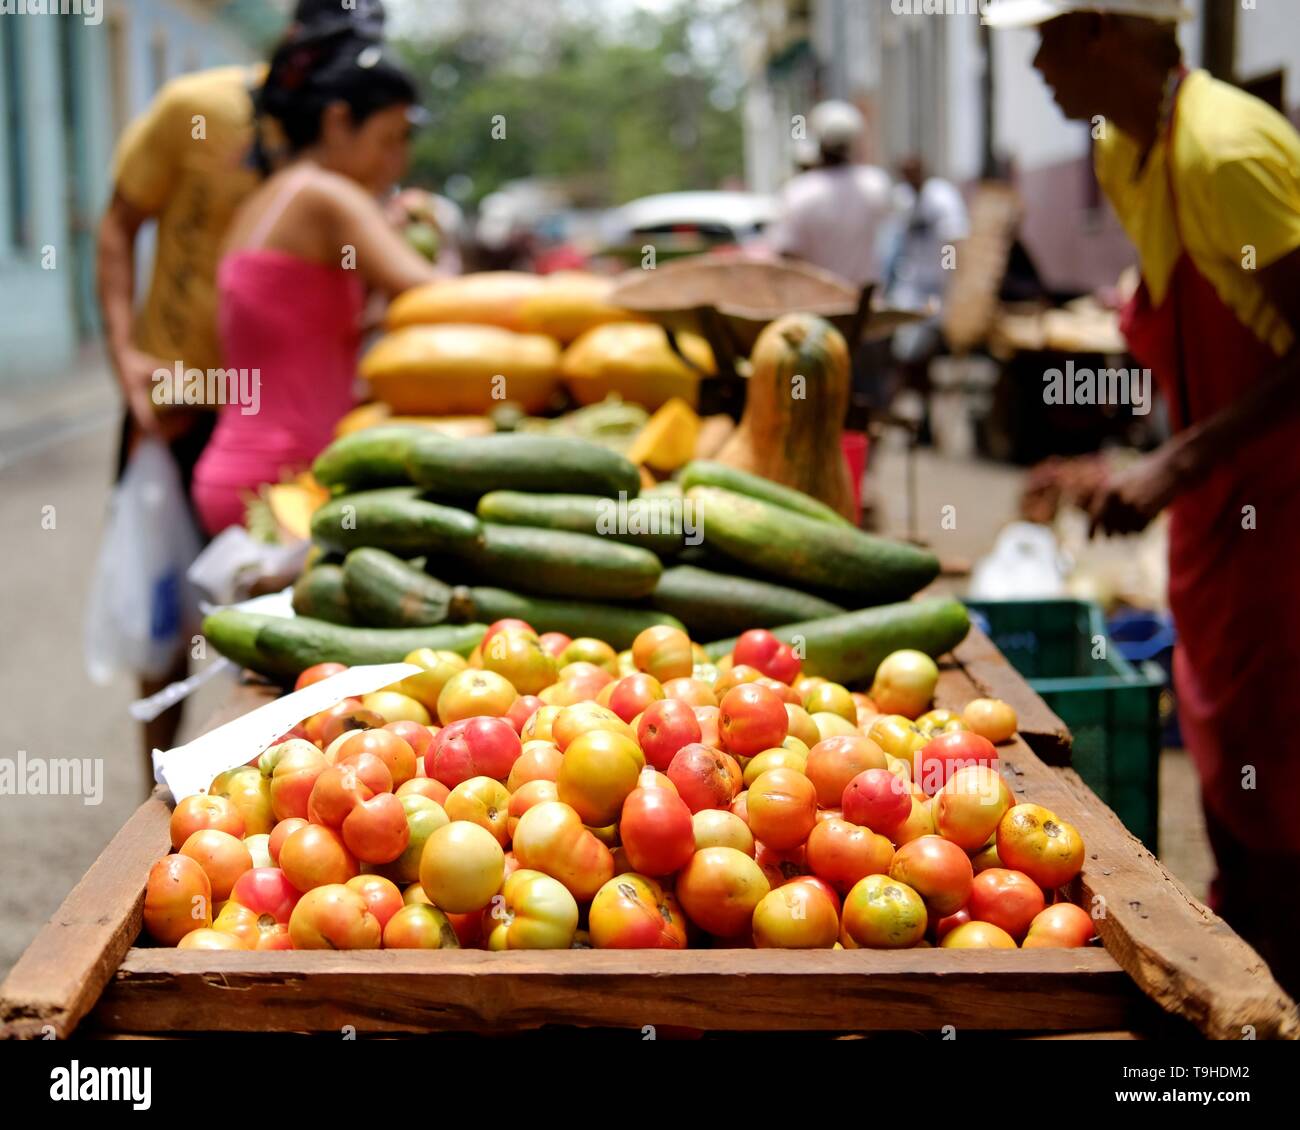 Shopping for fresh fruit and vegetables in Havana, Cuba. A vendor sells from a hand-cart, displaying colourful local produce Stock Photo